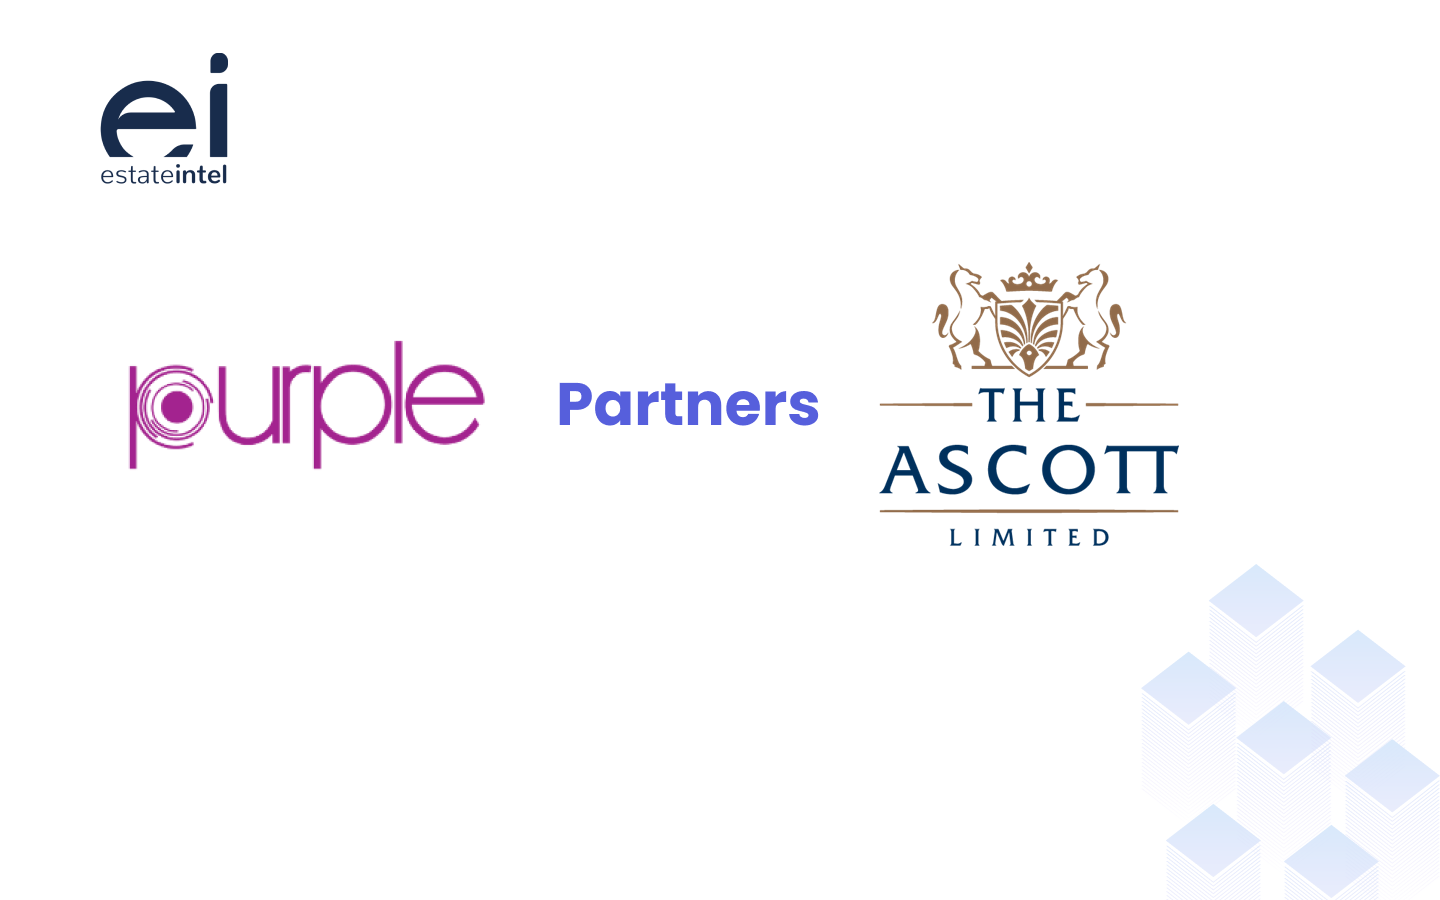 Purple partners Ascott Limited to introduce Citadines to Lagos